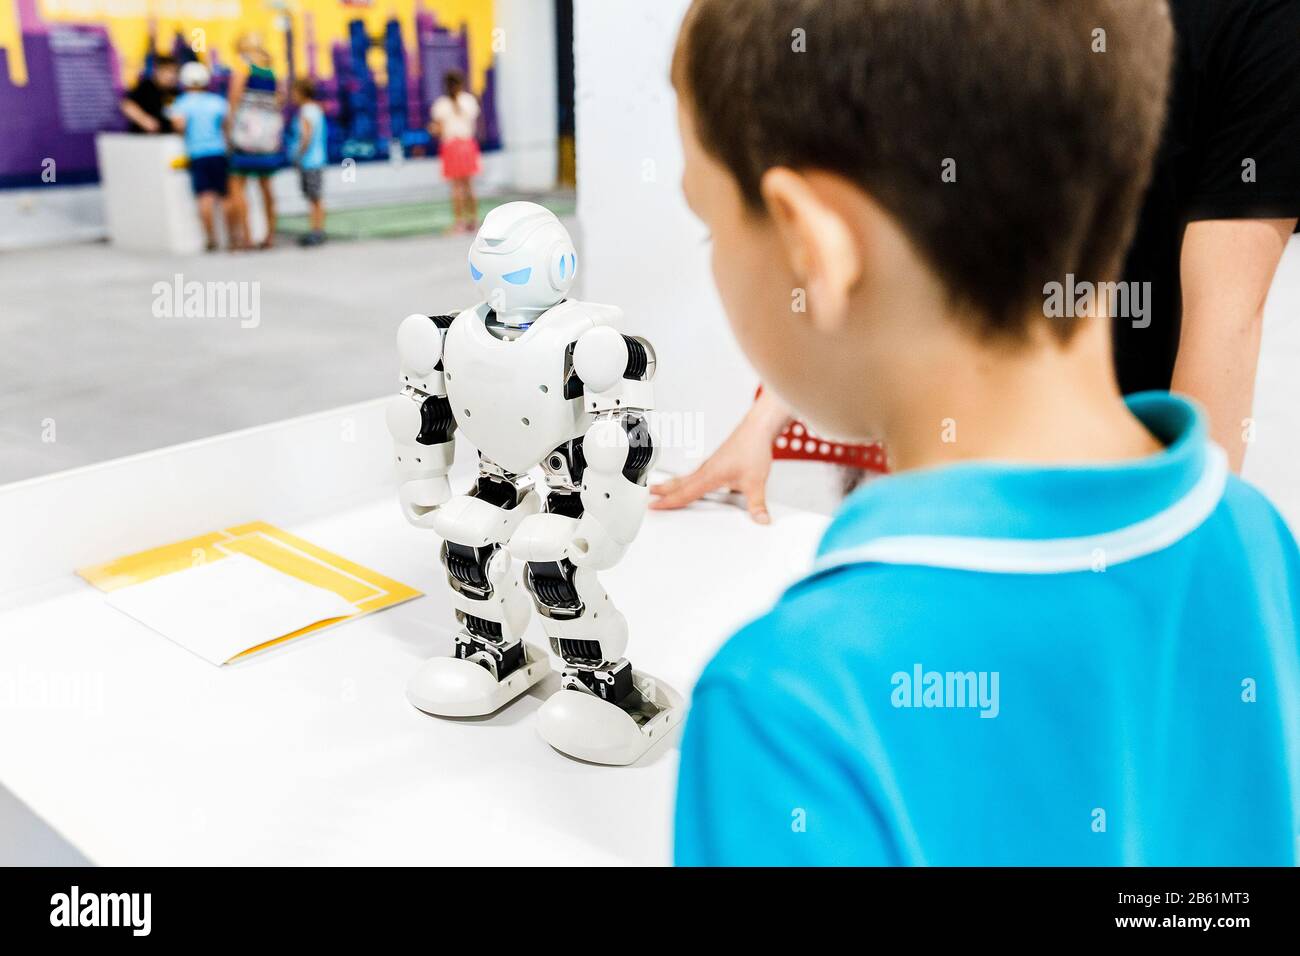 Kid boy playing with interactive robot toy at the exhibition Stock Photo